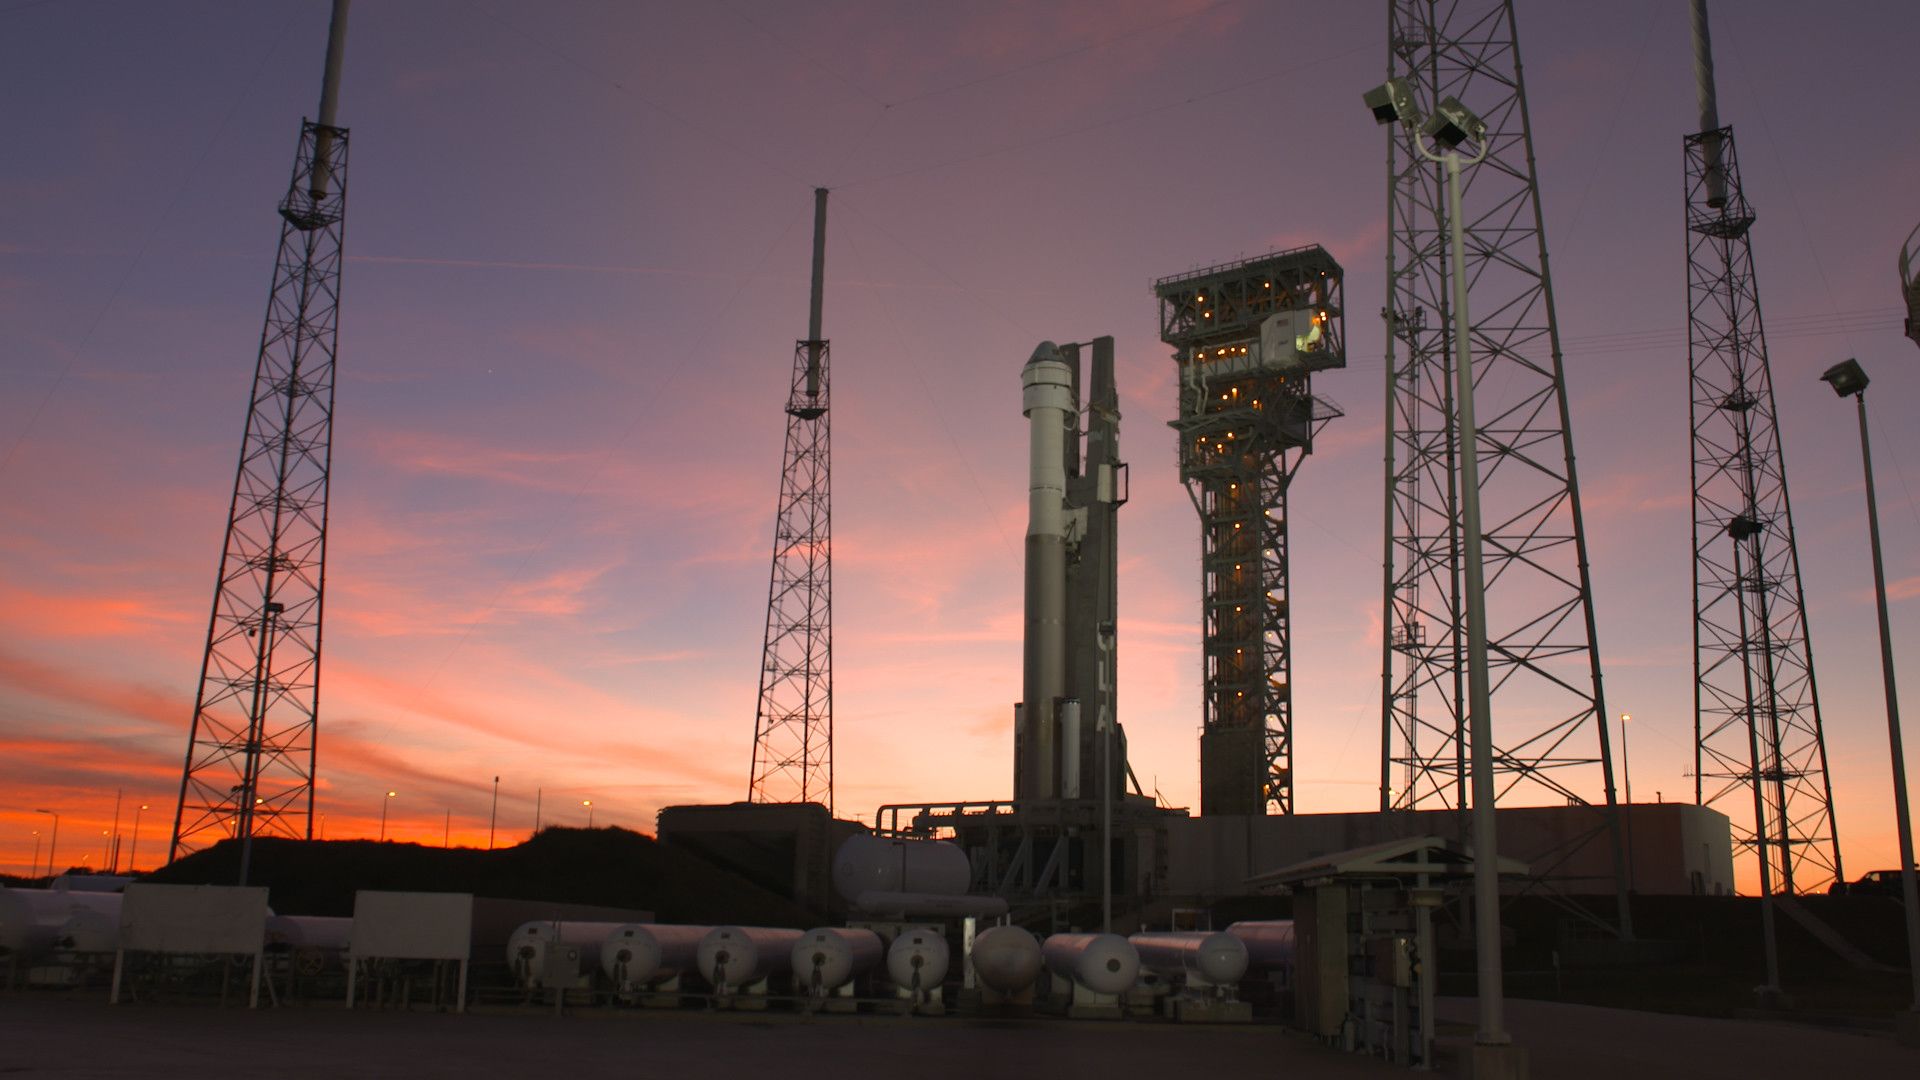 A rocket standing on a pad with a pink sunset behind it in Florida